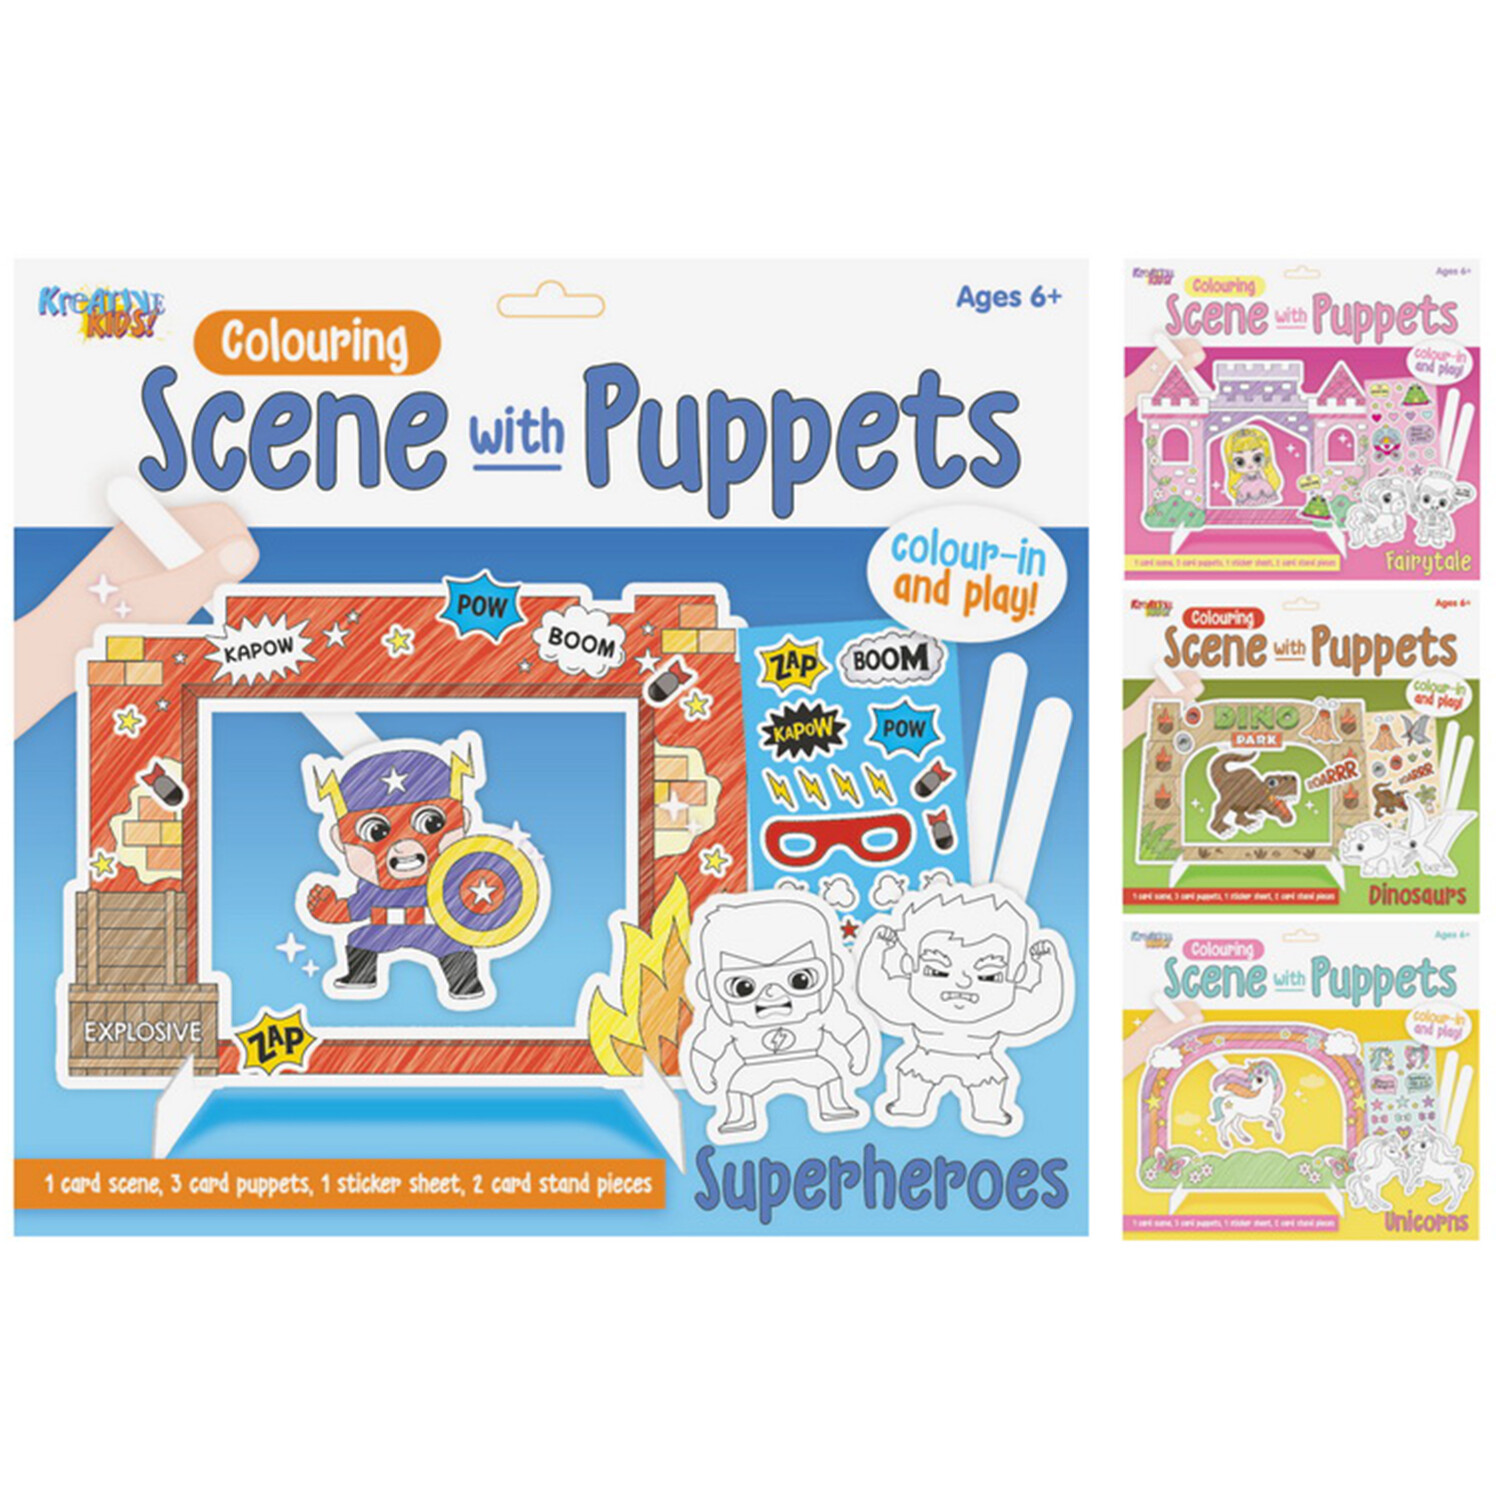 Colouring Scene with Puppets Image